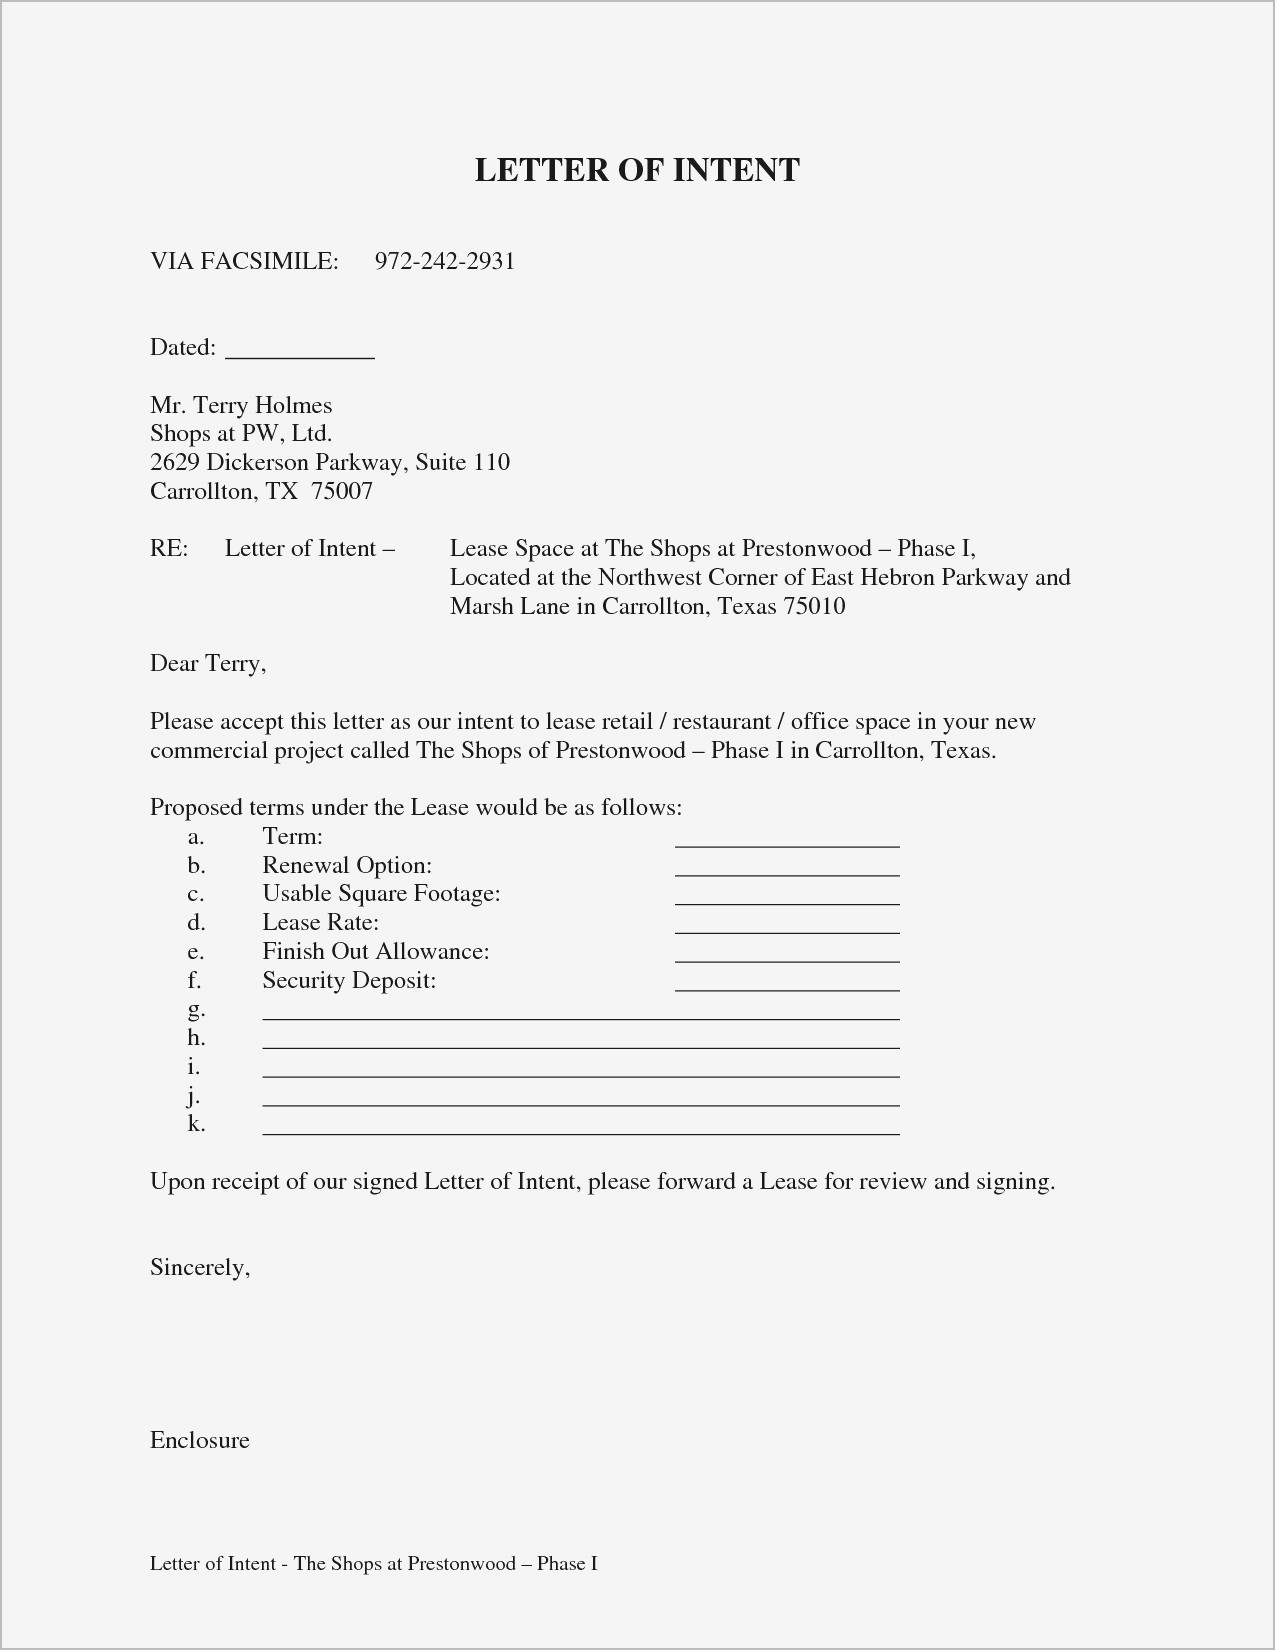 letter of intent to lease template example-Letter Intent to Lease New Universal Job Cover Letter Template Copy Letter Intent Lease Mercial 2-f